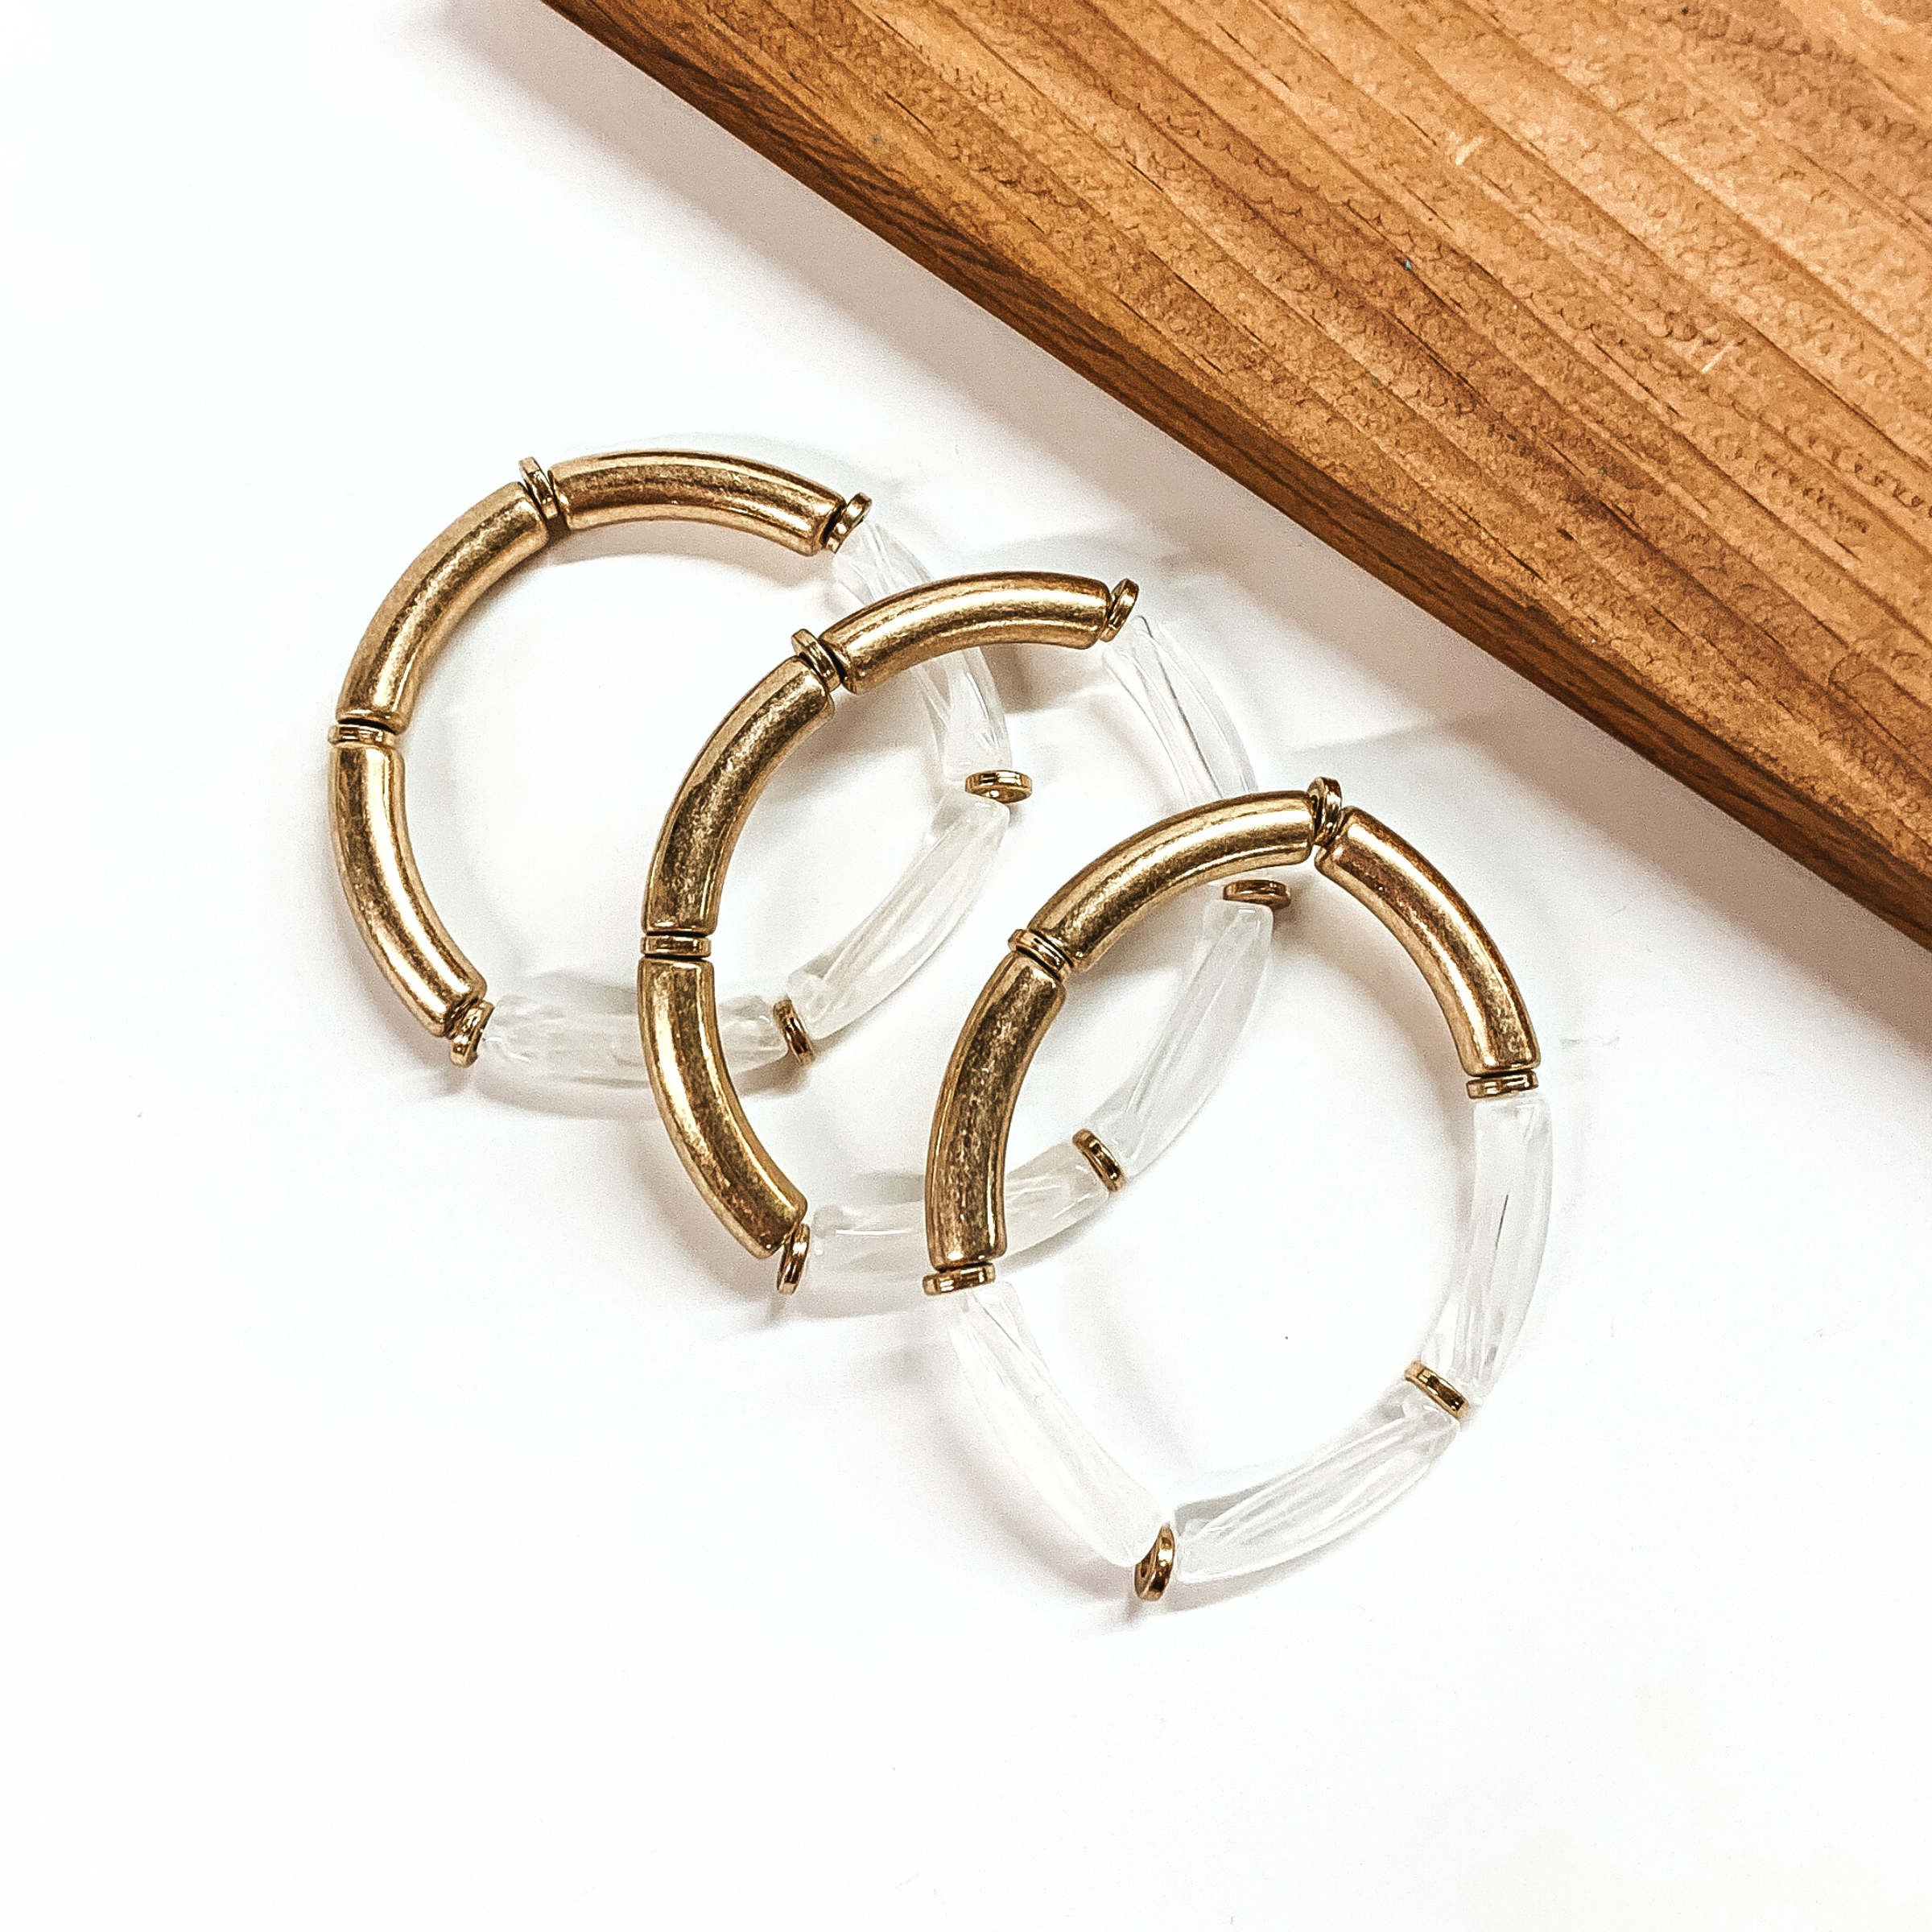 This is a set of three tube bracelets in metallic gold and clear, with gold spacers. This bracelet set is taken on a white background with a slab of wood in the back as decor.